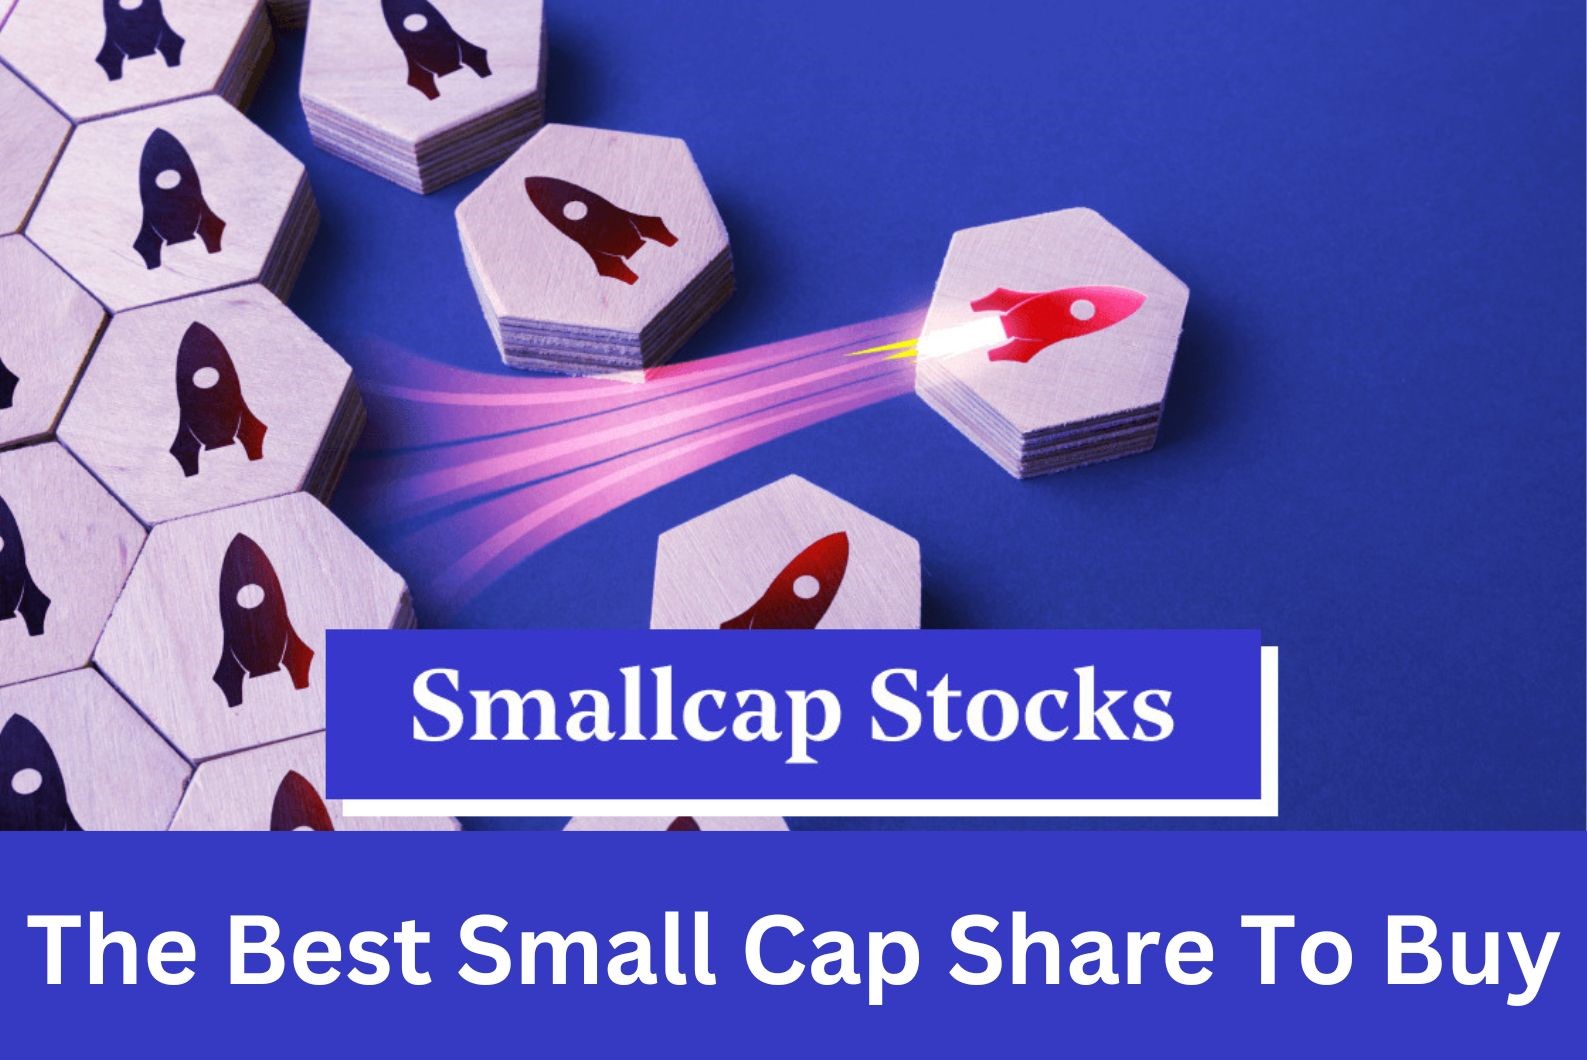 Which Is The Best Small Cap Share To Buy For High Growth Potential?